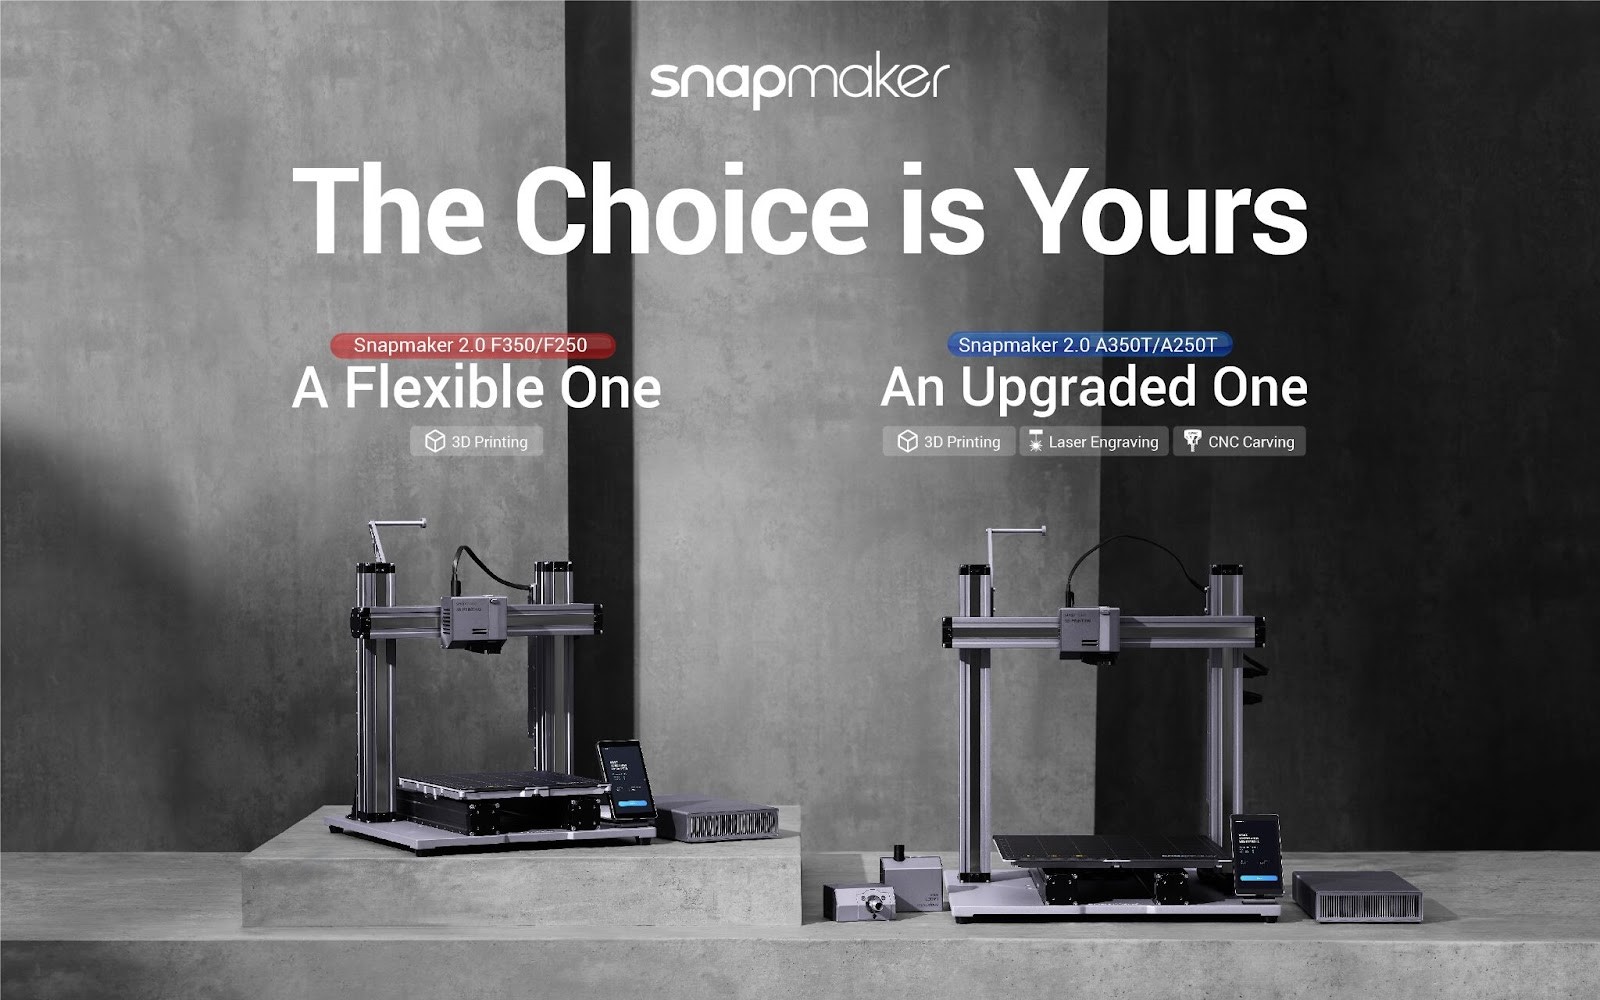 Snapmaker's new 2.0 AT and F models. Image via Snapmaker.